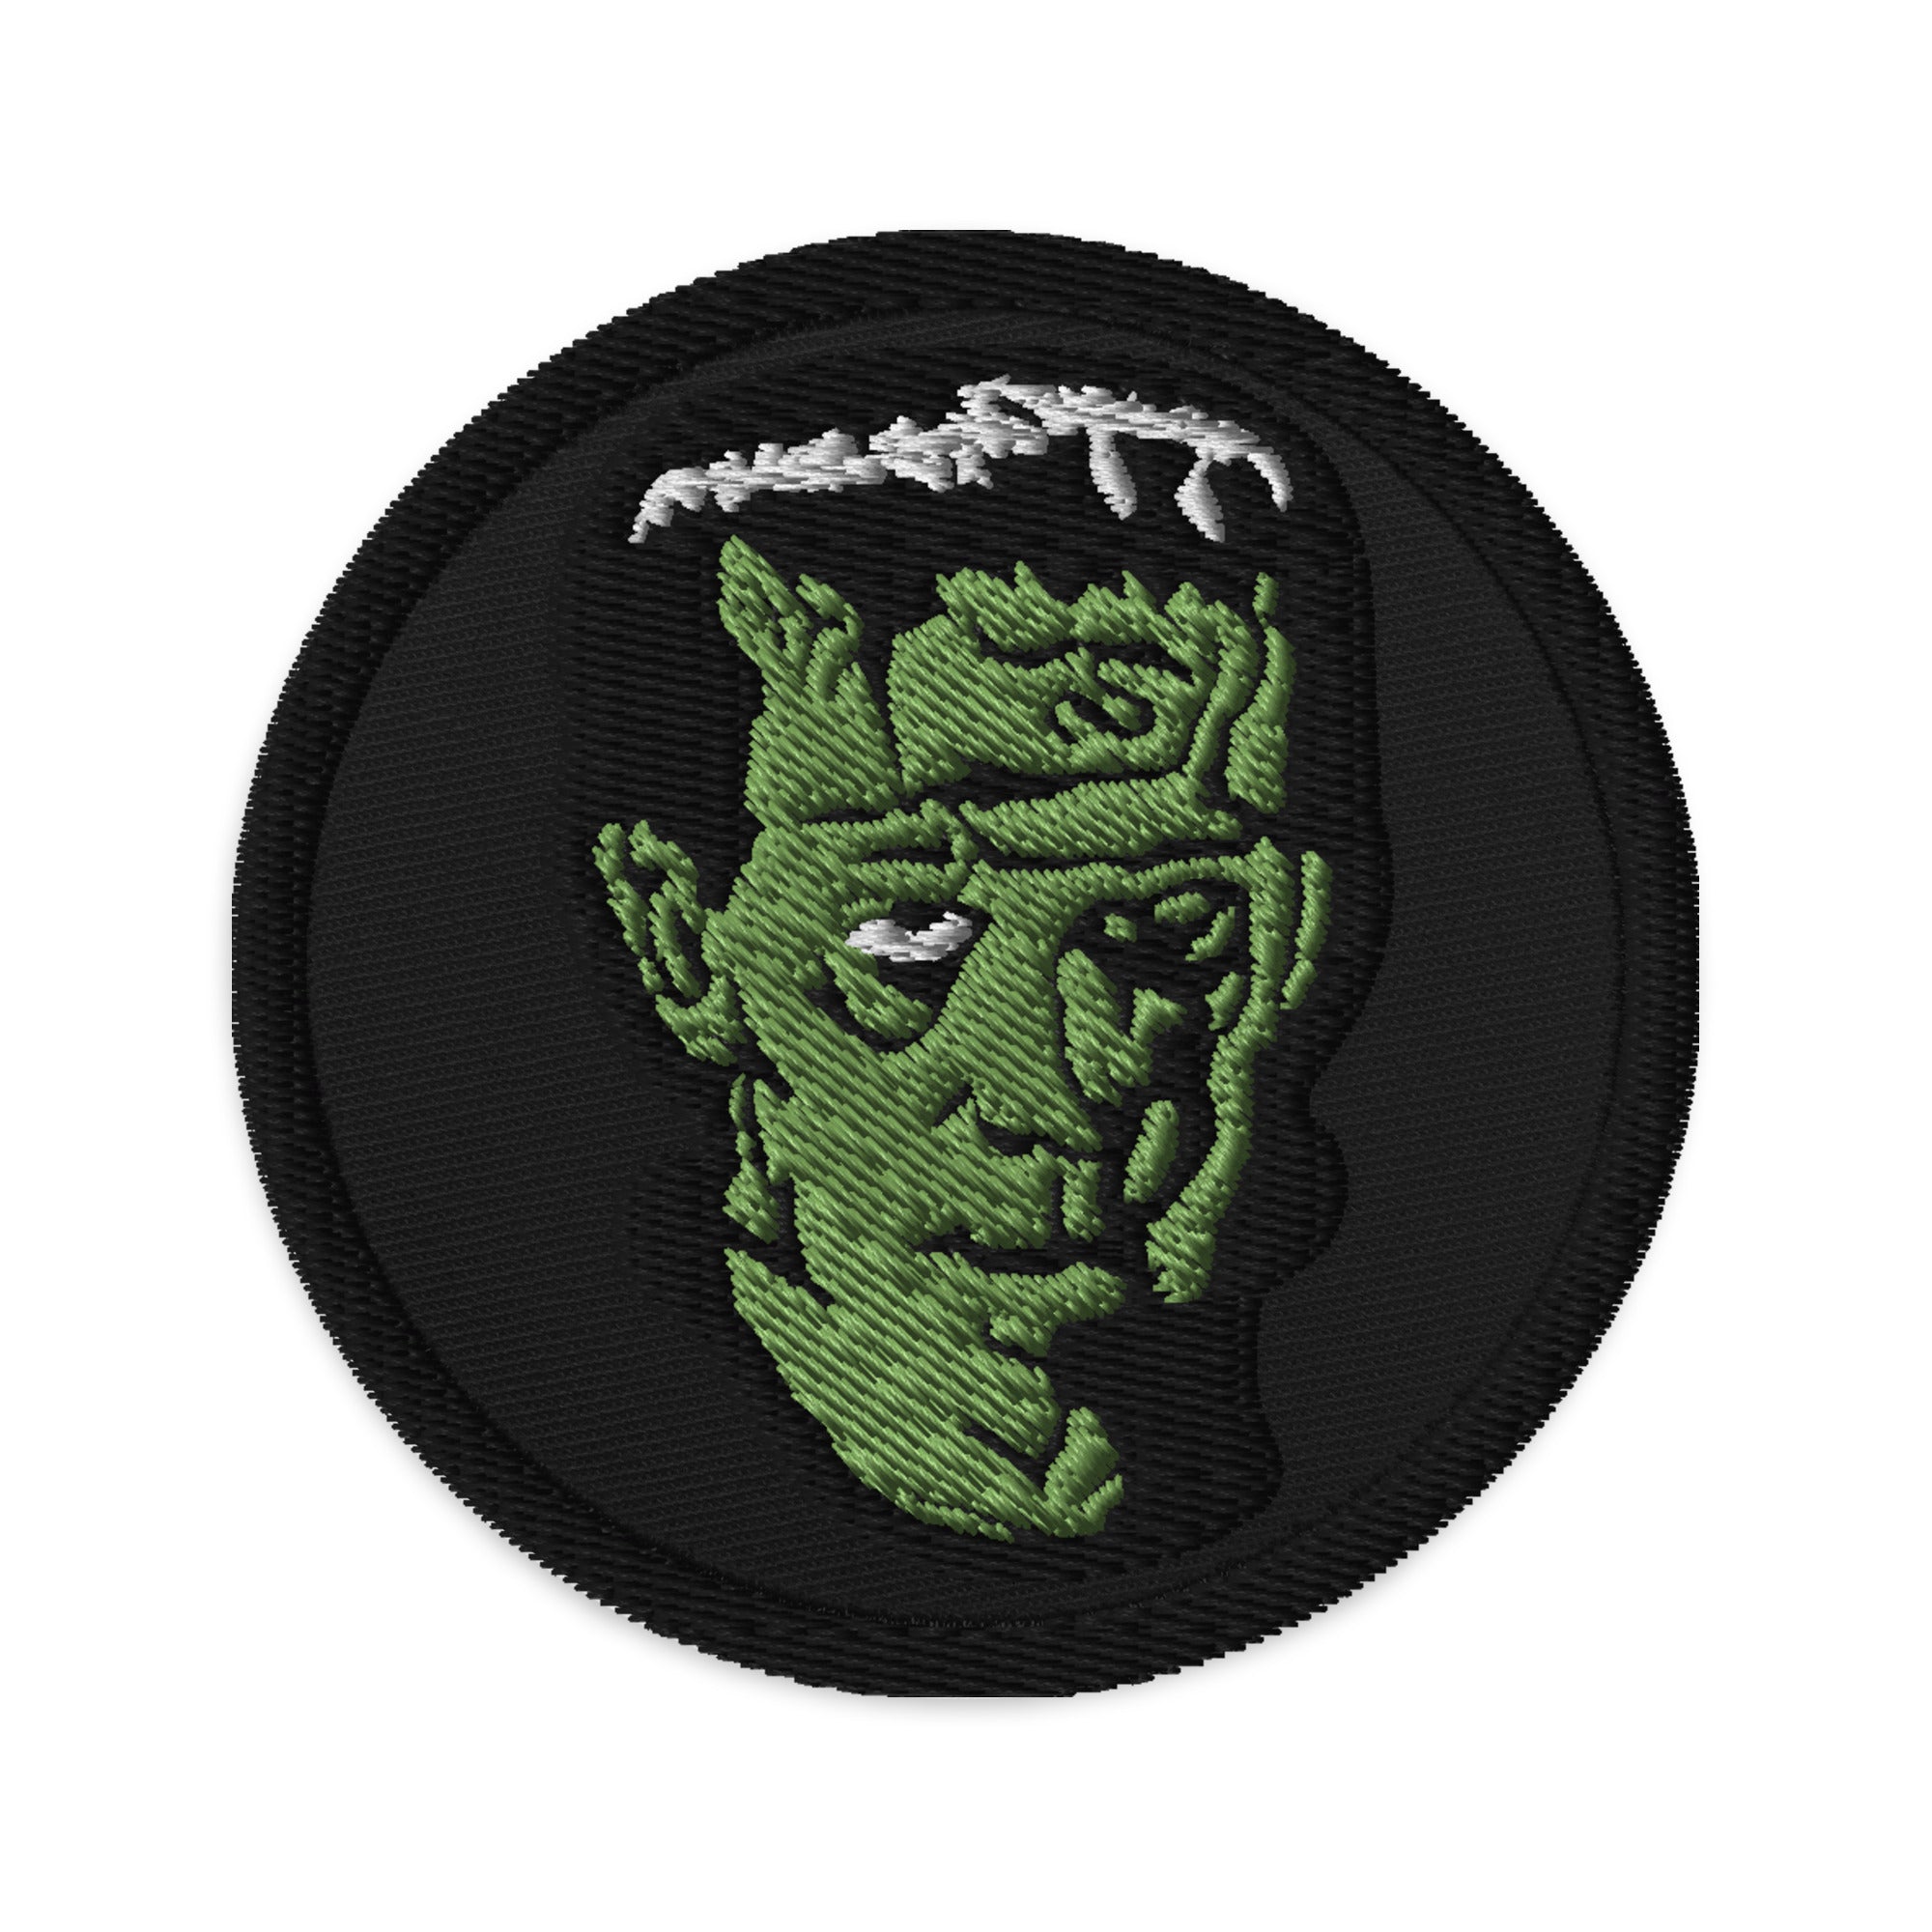 The Modern Prometheus Dr. Frankenstein's Monster Embroidered Patch Classic Horror - Edge of Life Designs